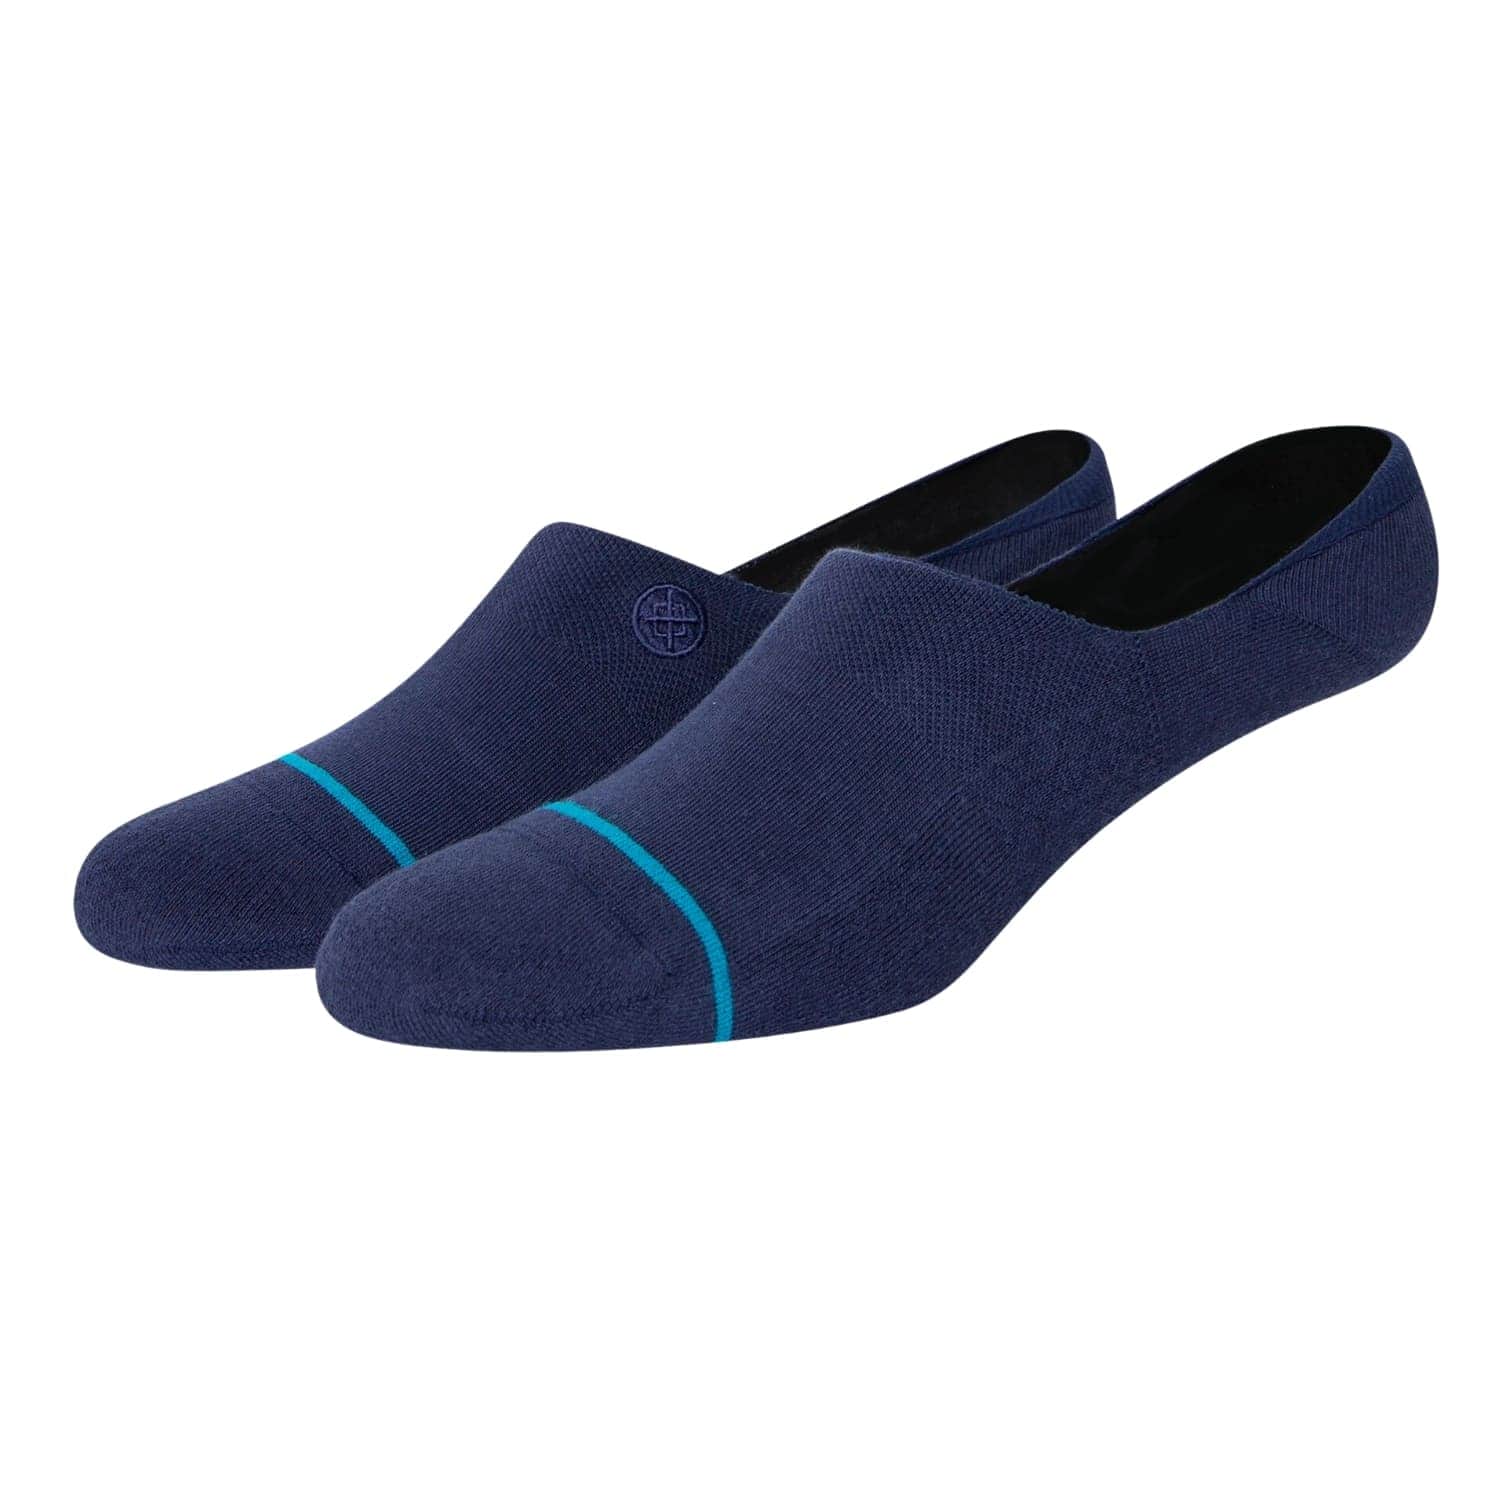 Stance Icon No Show Invisible Socks Dark Navy - Mens Invisible/No Show Socks by Stance